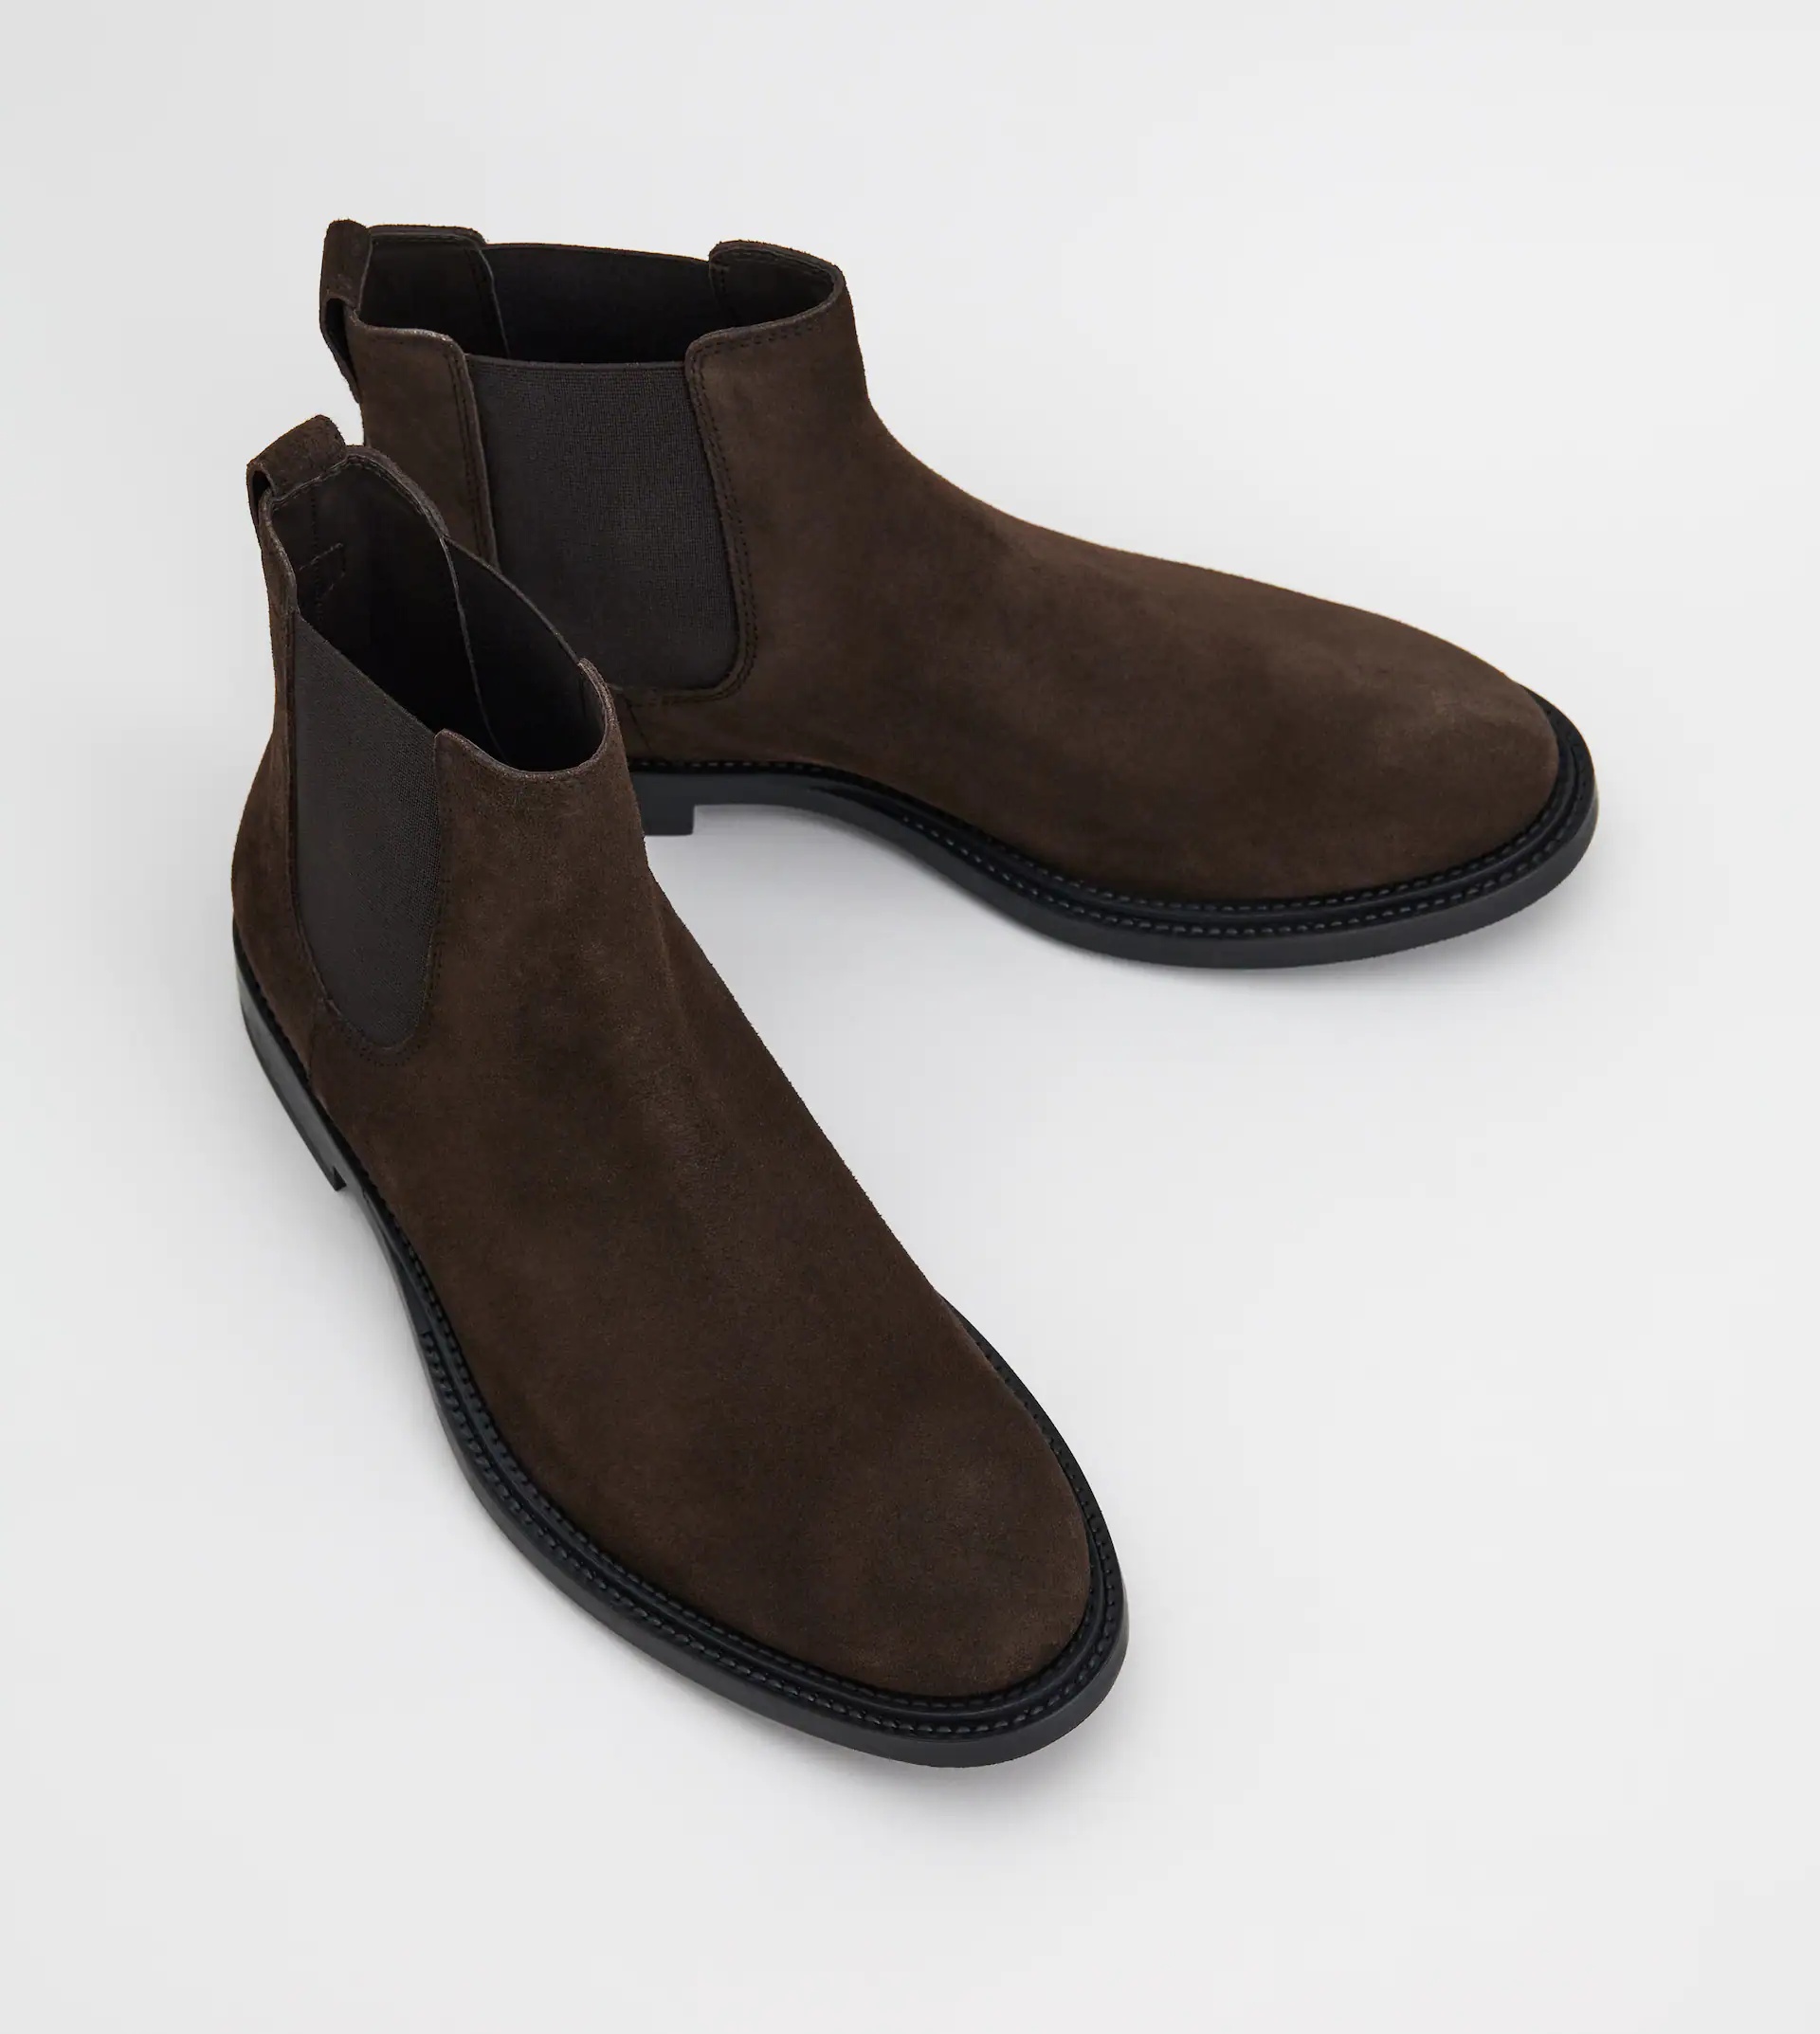 ANKLE BOOTS IN SUEDE - BROWN - 2